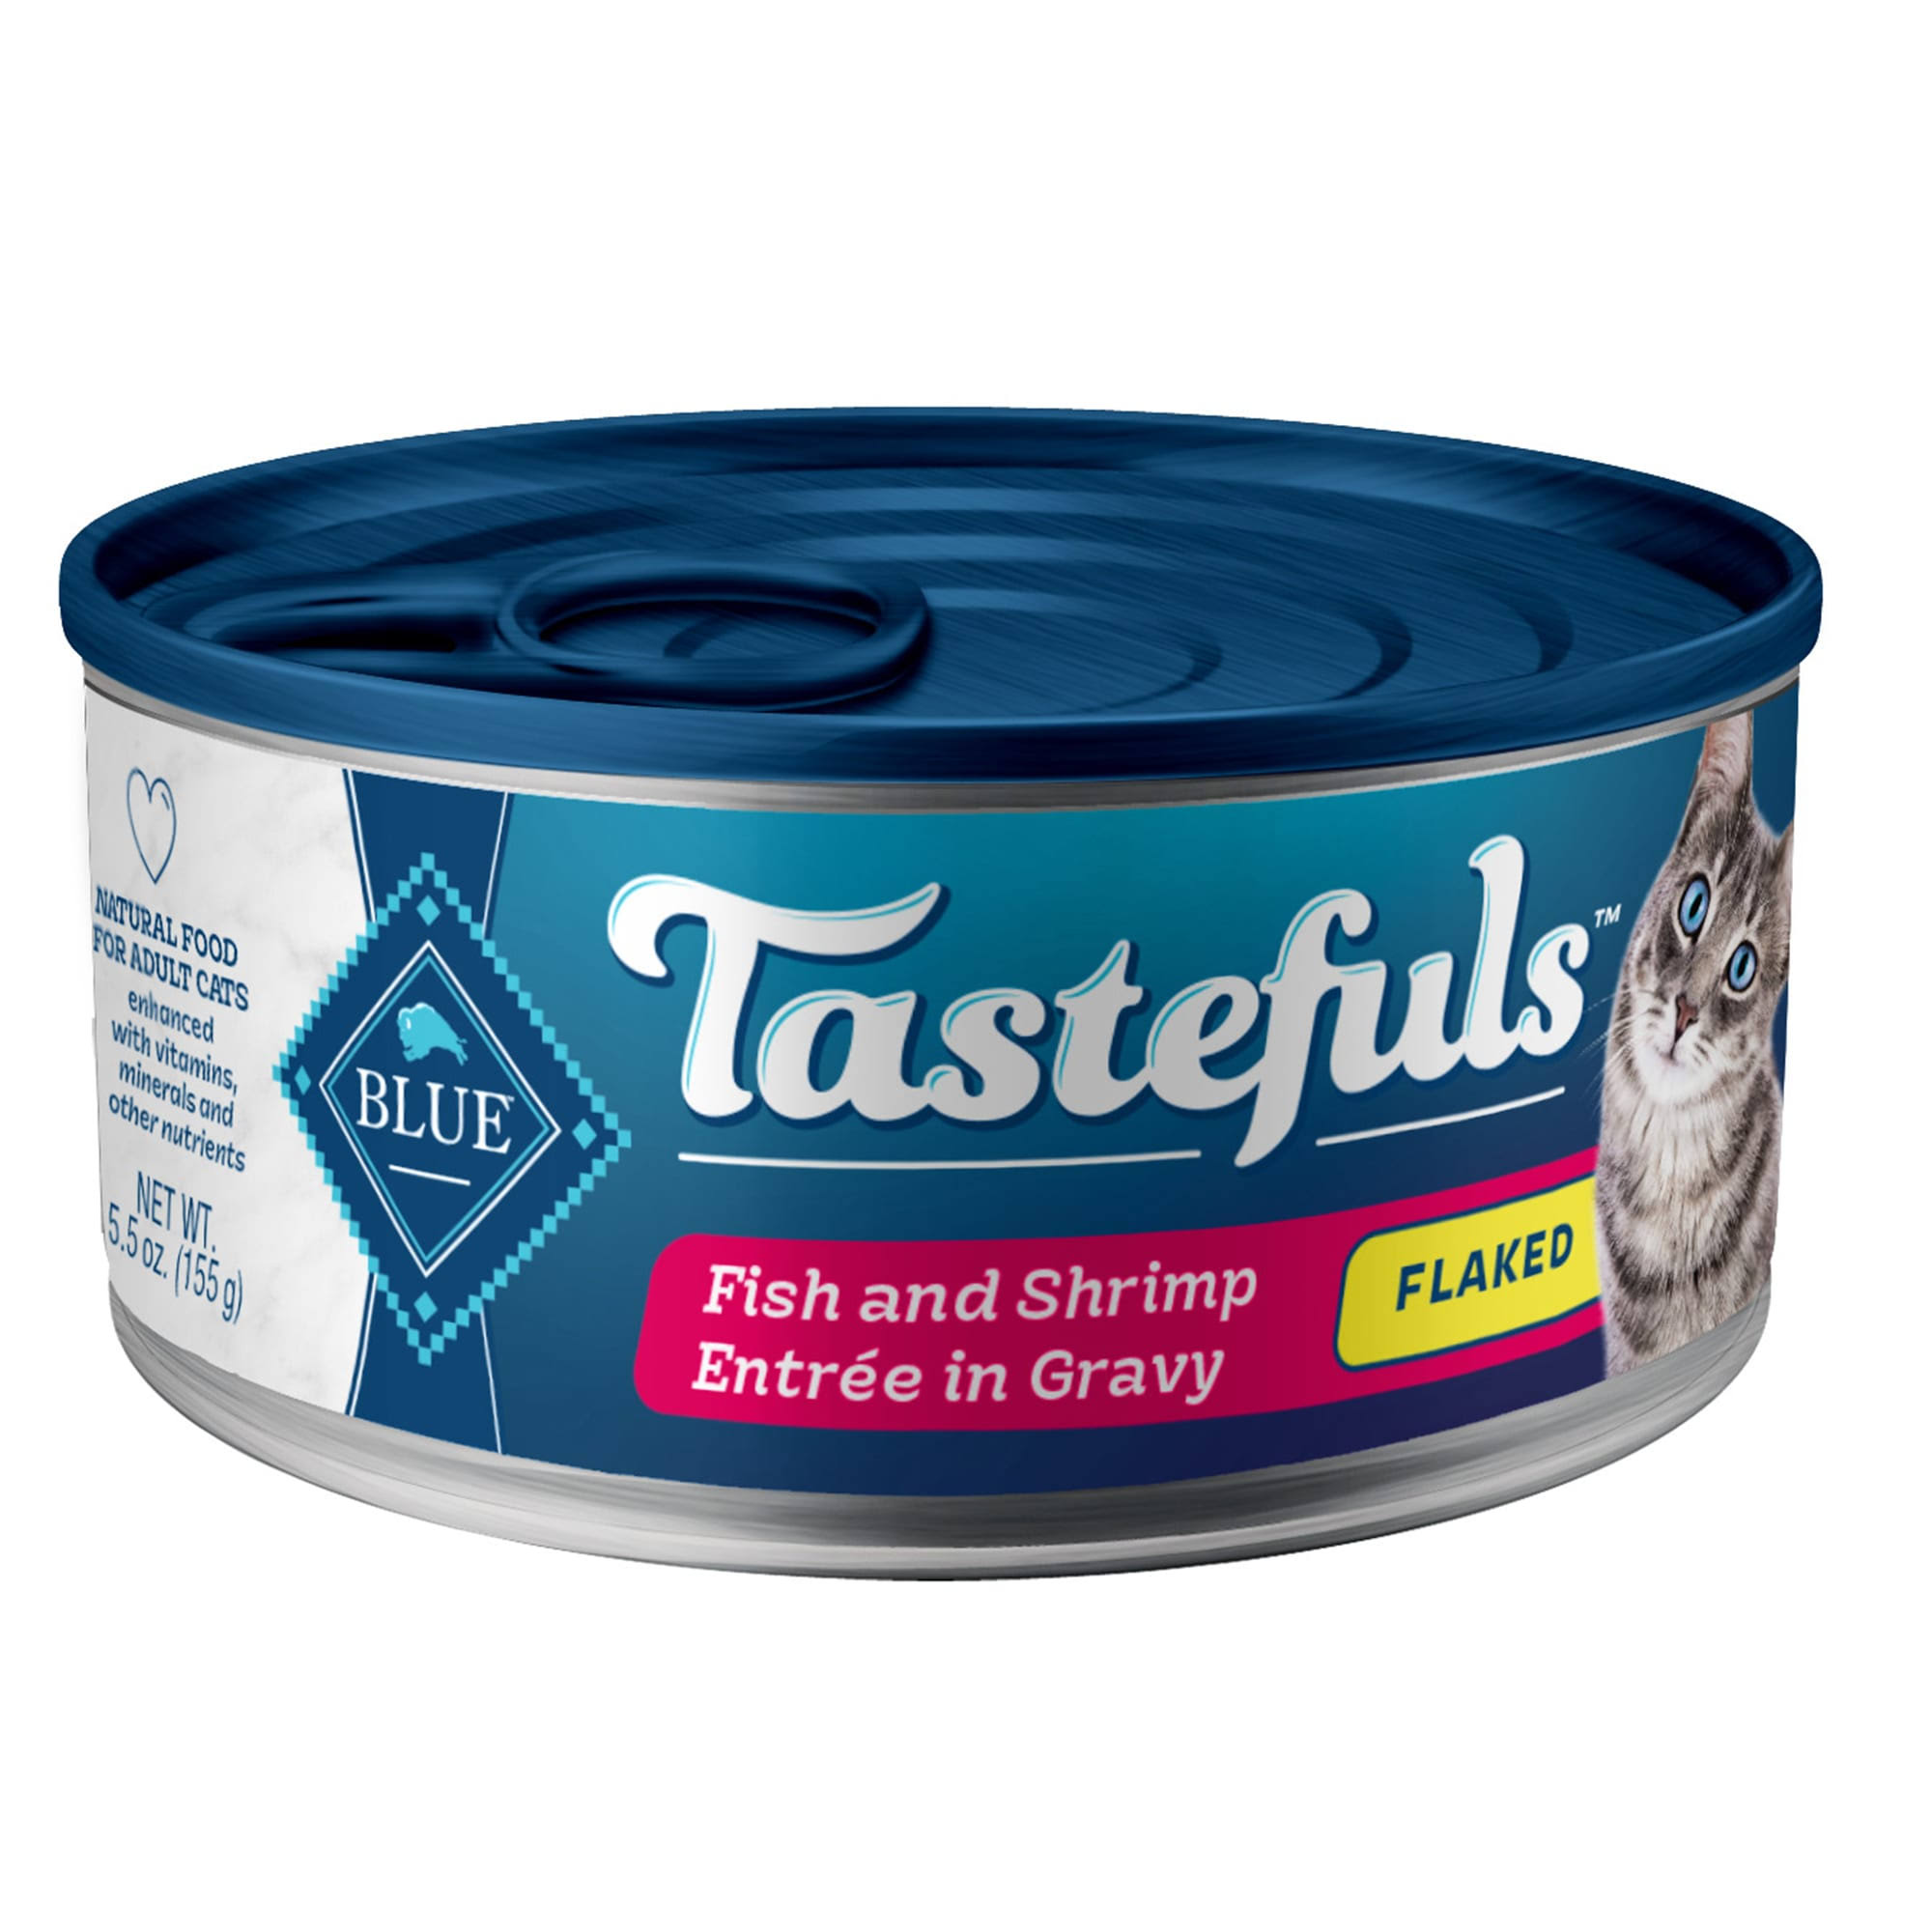 Blue Buffalo Blue Tastefuls Food for Cats, Fish and Shrimp Entree in Gravy, Flaked, Adult - 5.5 oz